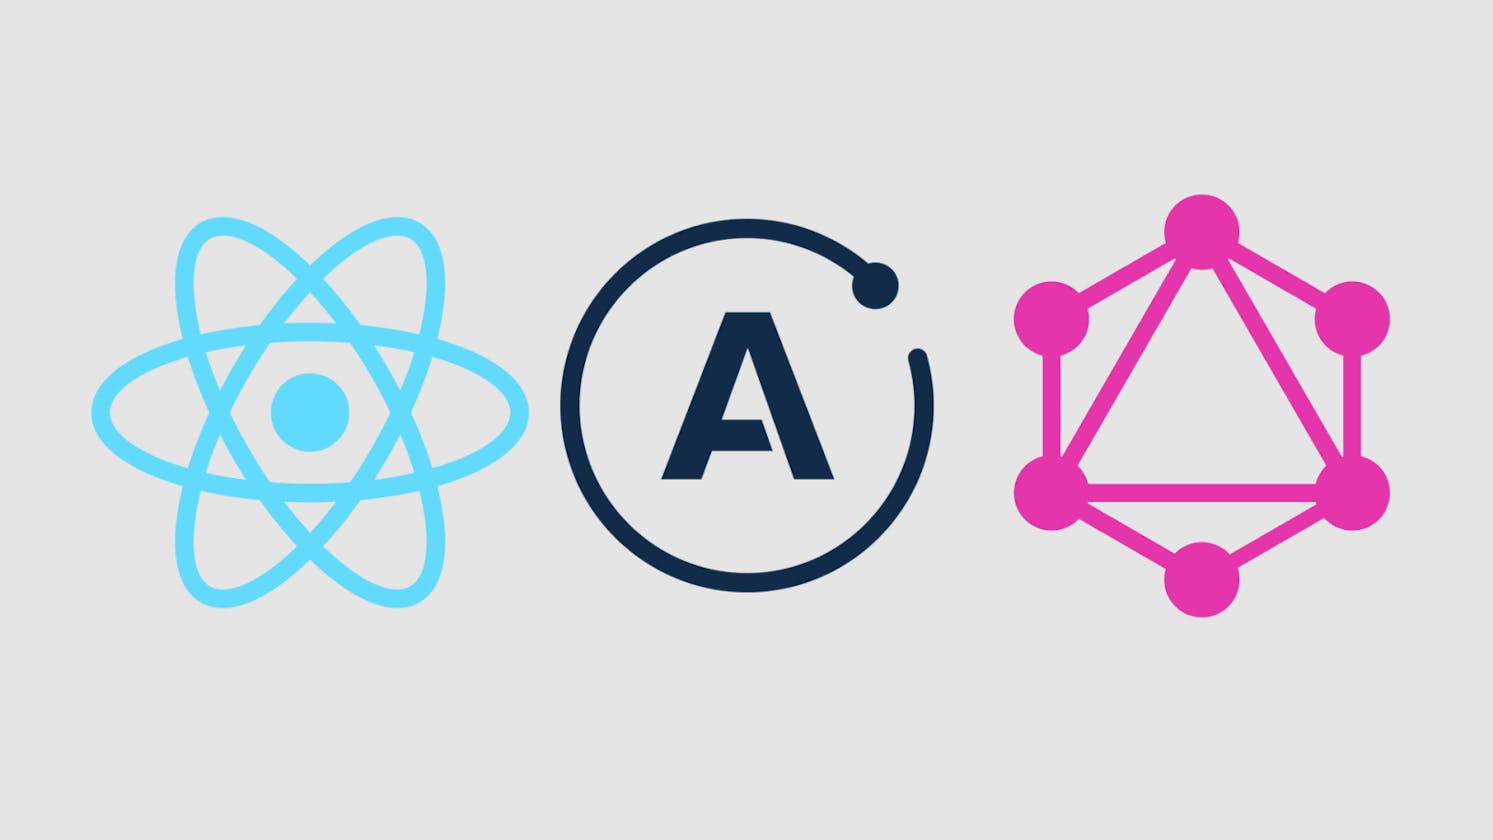 How to write "Create mutations" in  React using Apollo Client